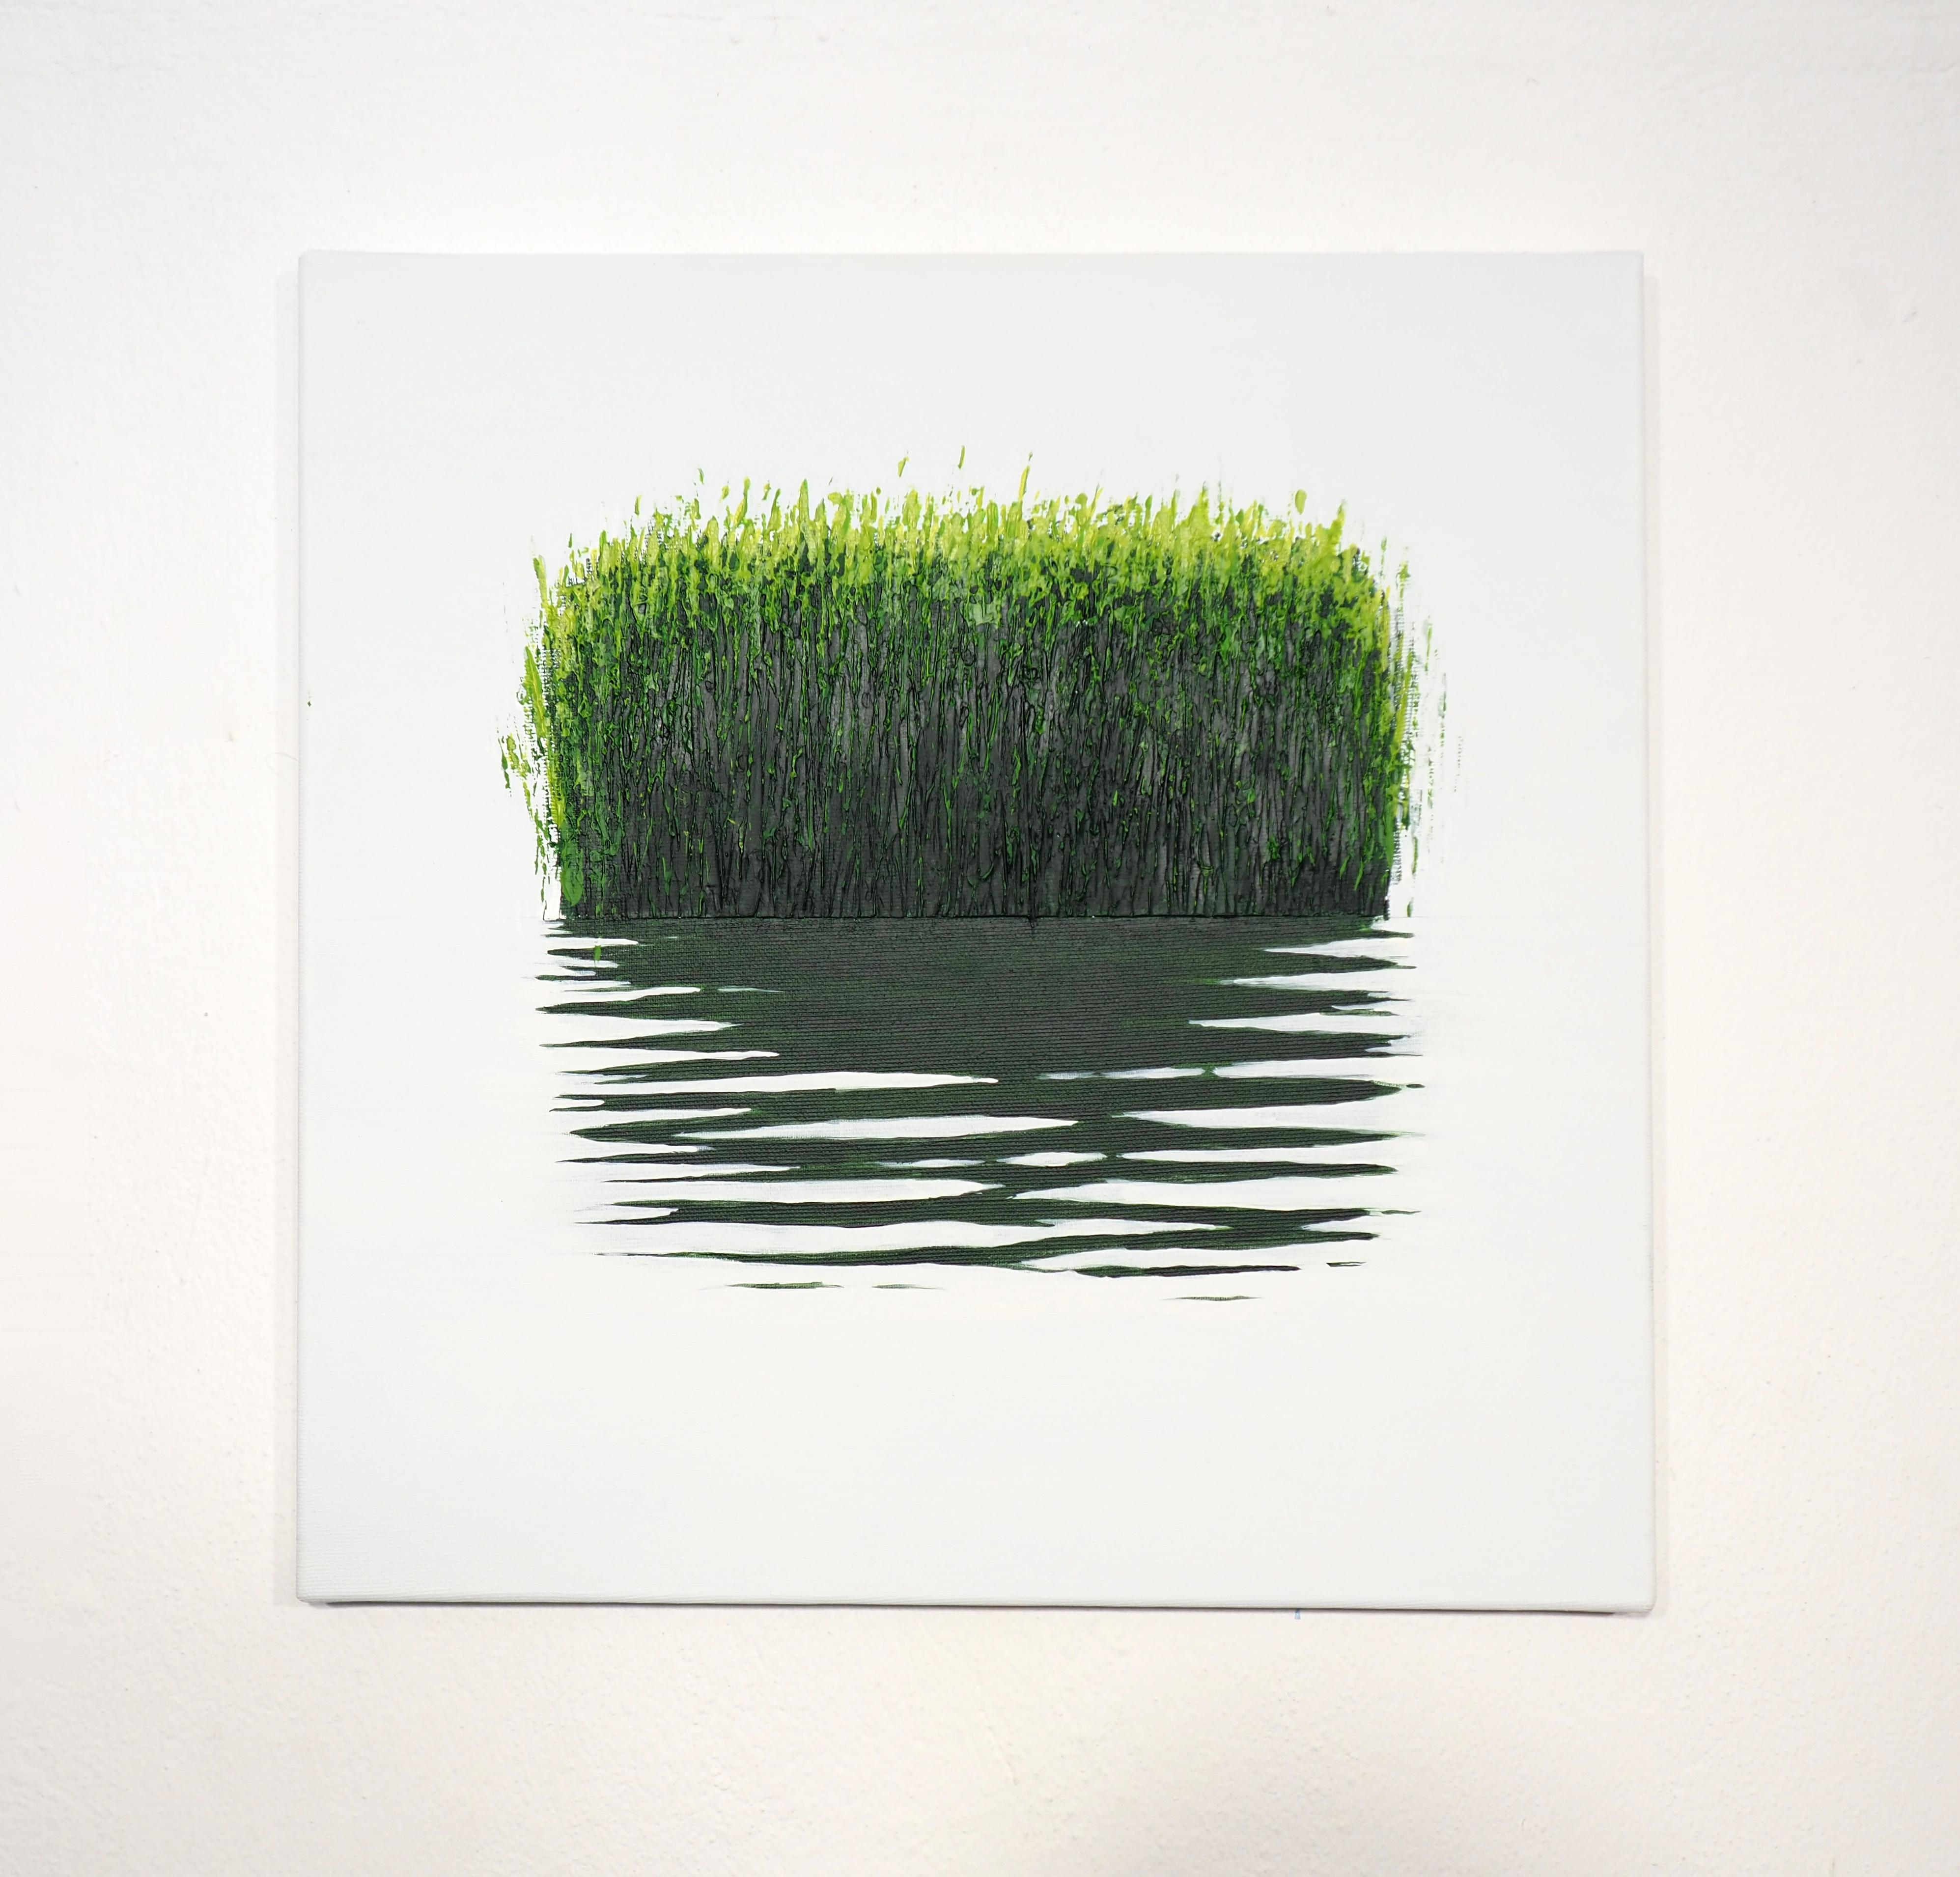 To emphasize the grasses even more, the artist uses modeling paste, It gives the beautiful painting even more depth. 

A few words of the artist about his art:

When i painting landscapes, I usually choose simple geometric arrangements, contrasts of